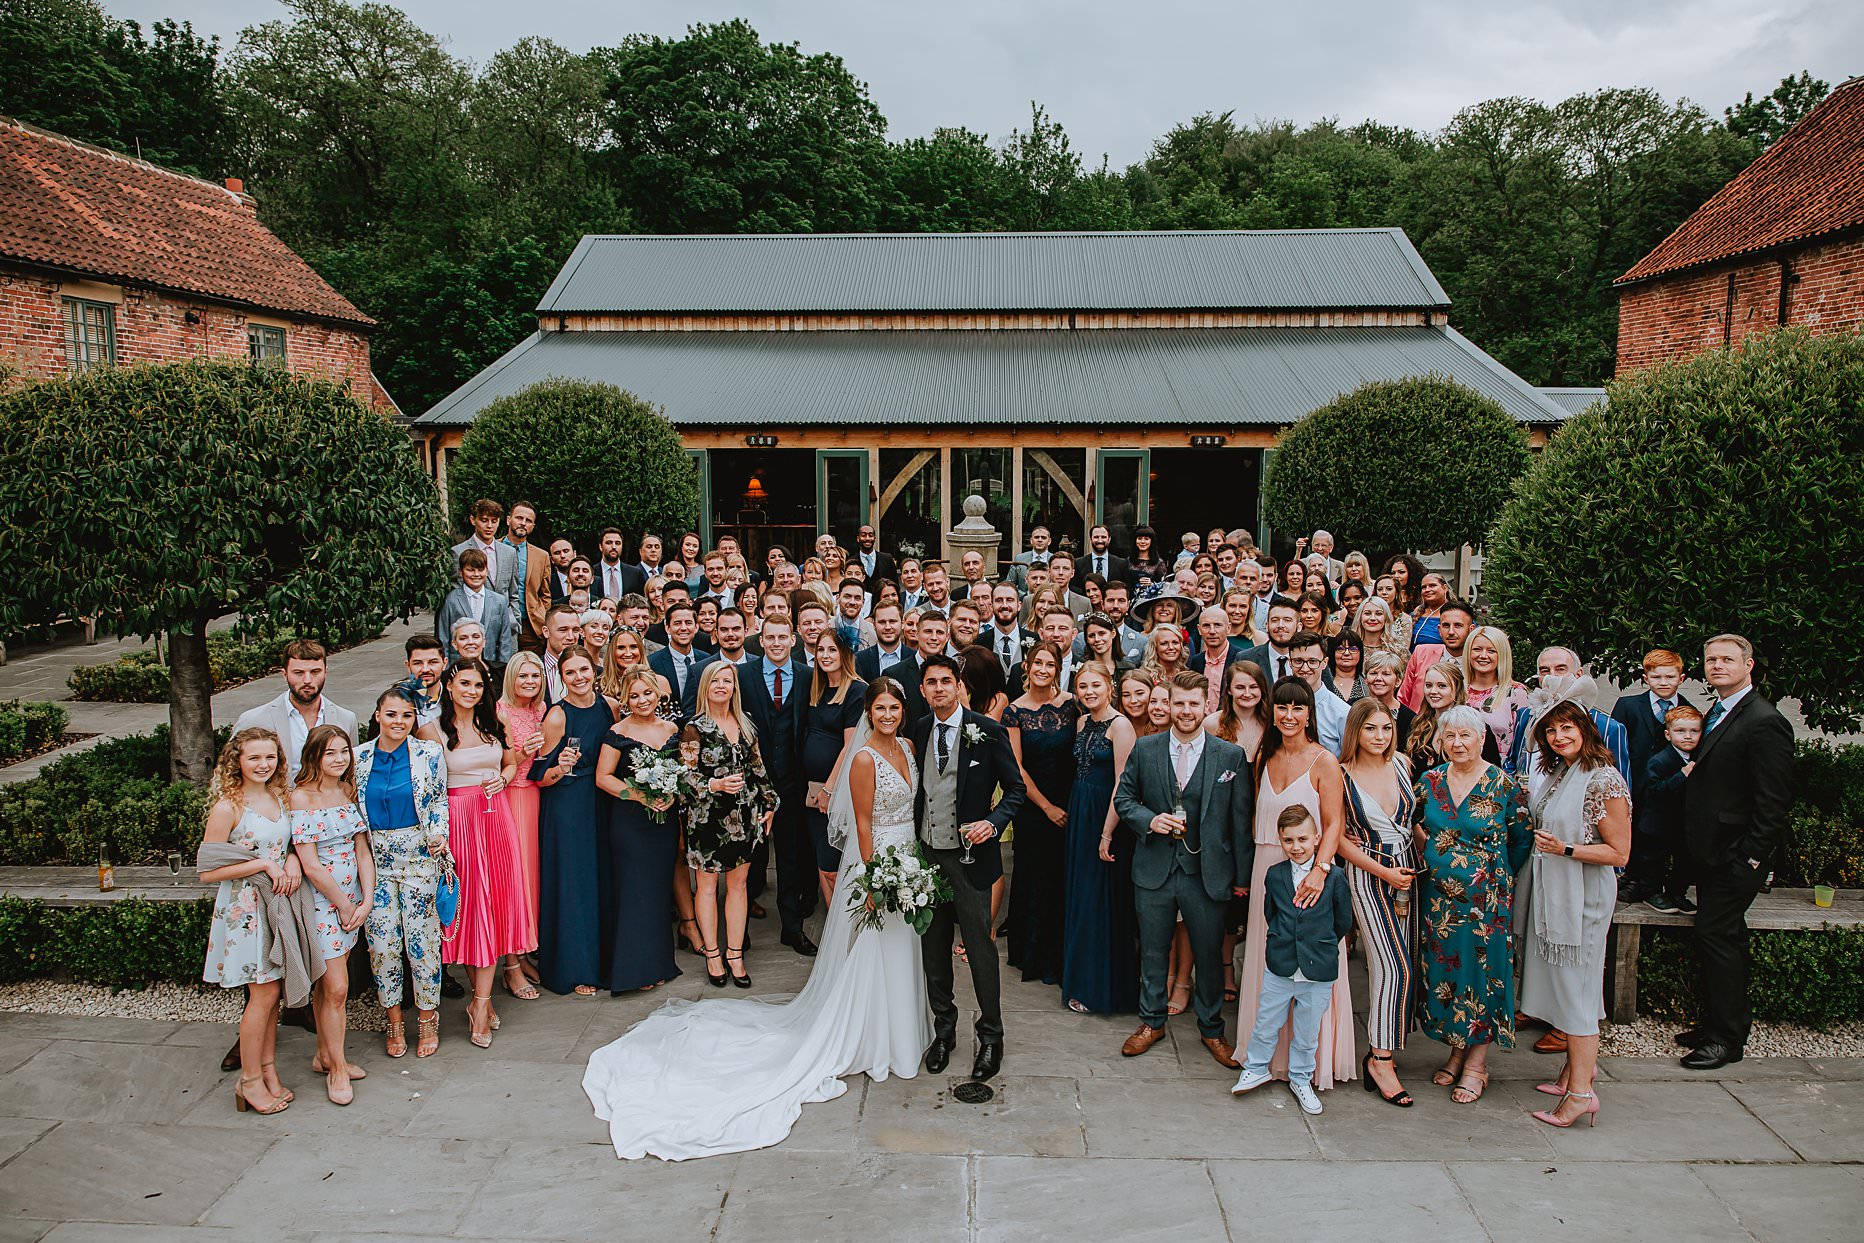 A large group photo of all wedding guests outside Hazel Gap Barn wedding venue. Bride and groom are stood at the front of the group.